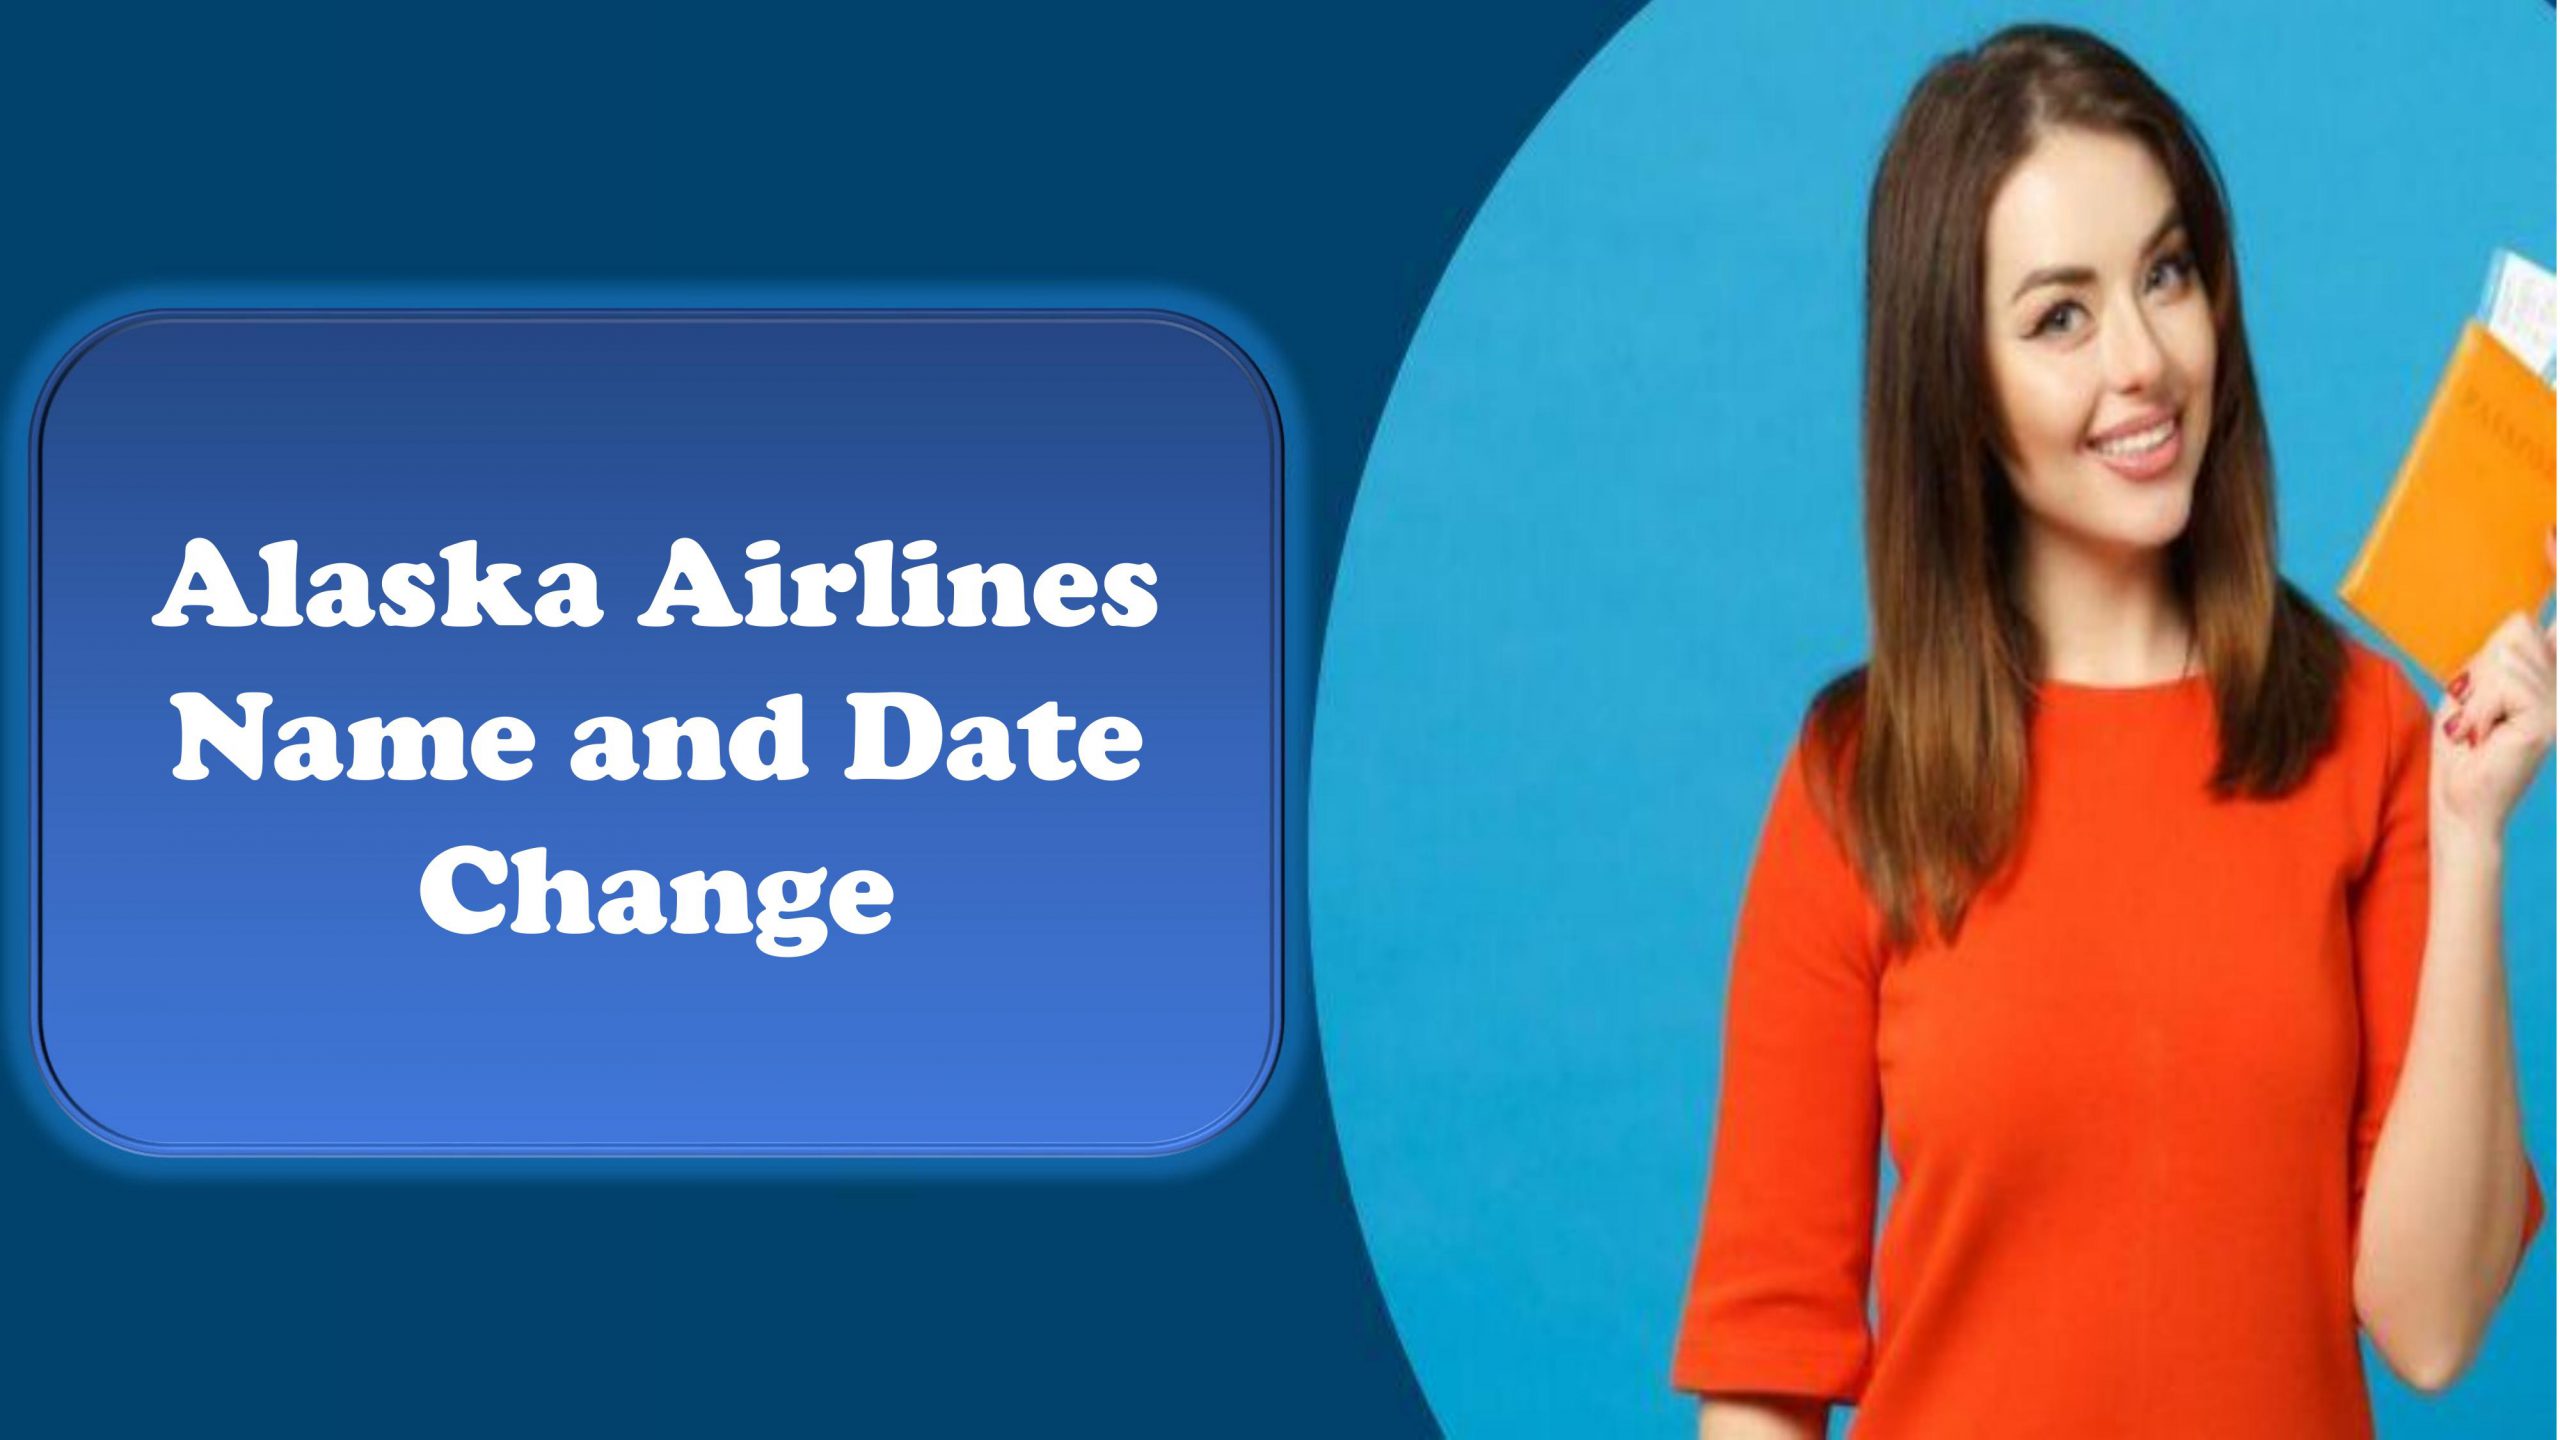 How to Change Name and Date in Alaska Airlines